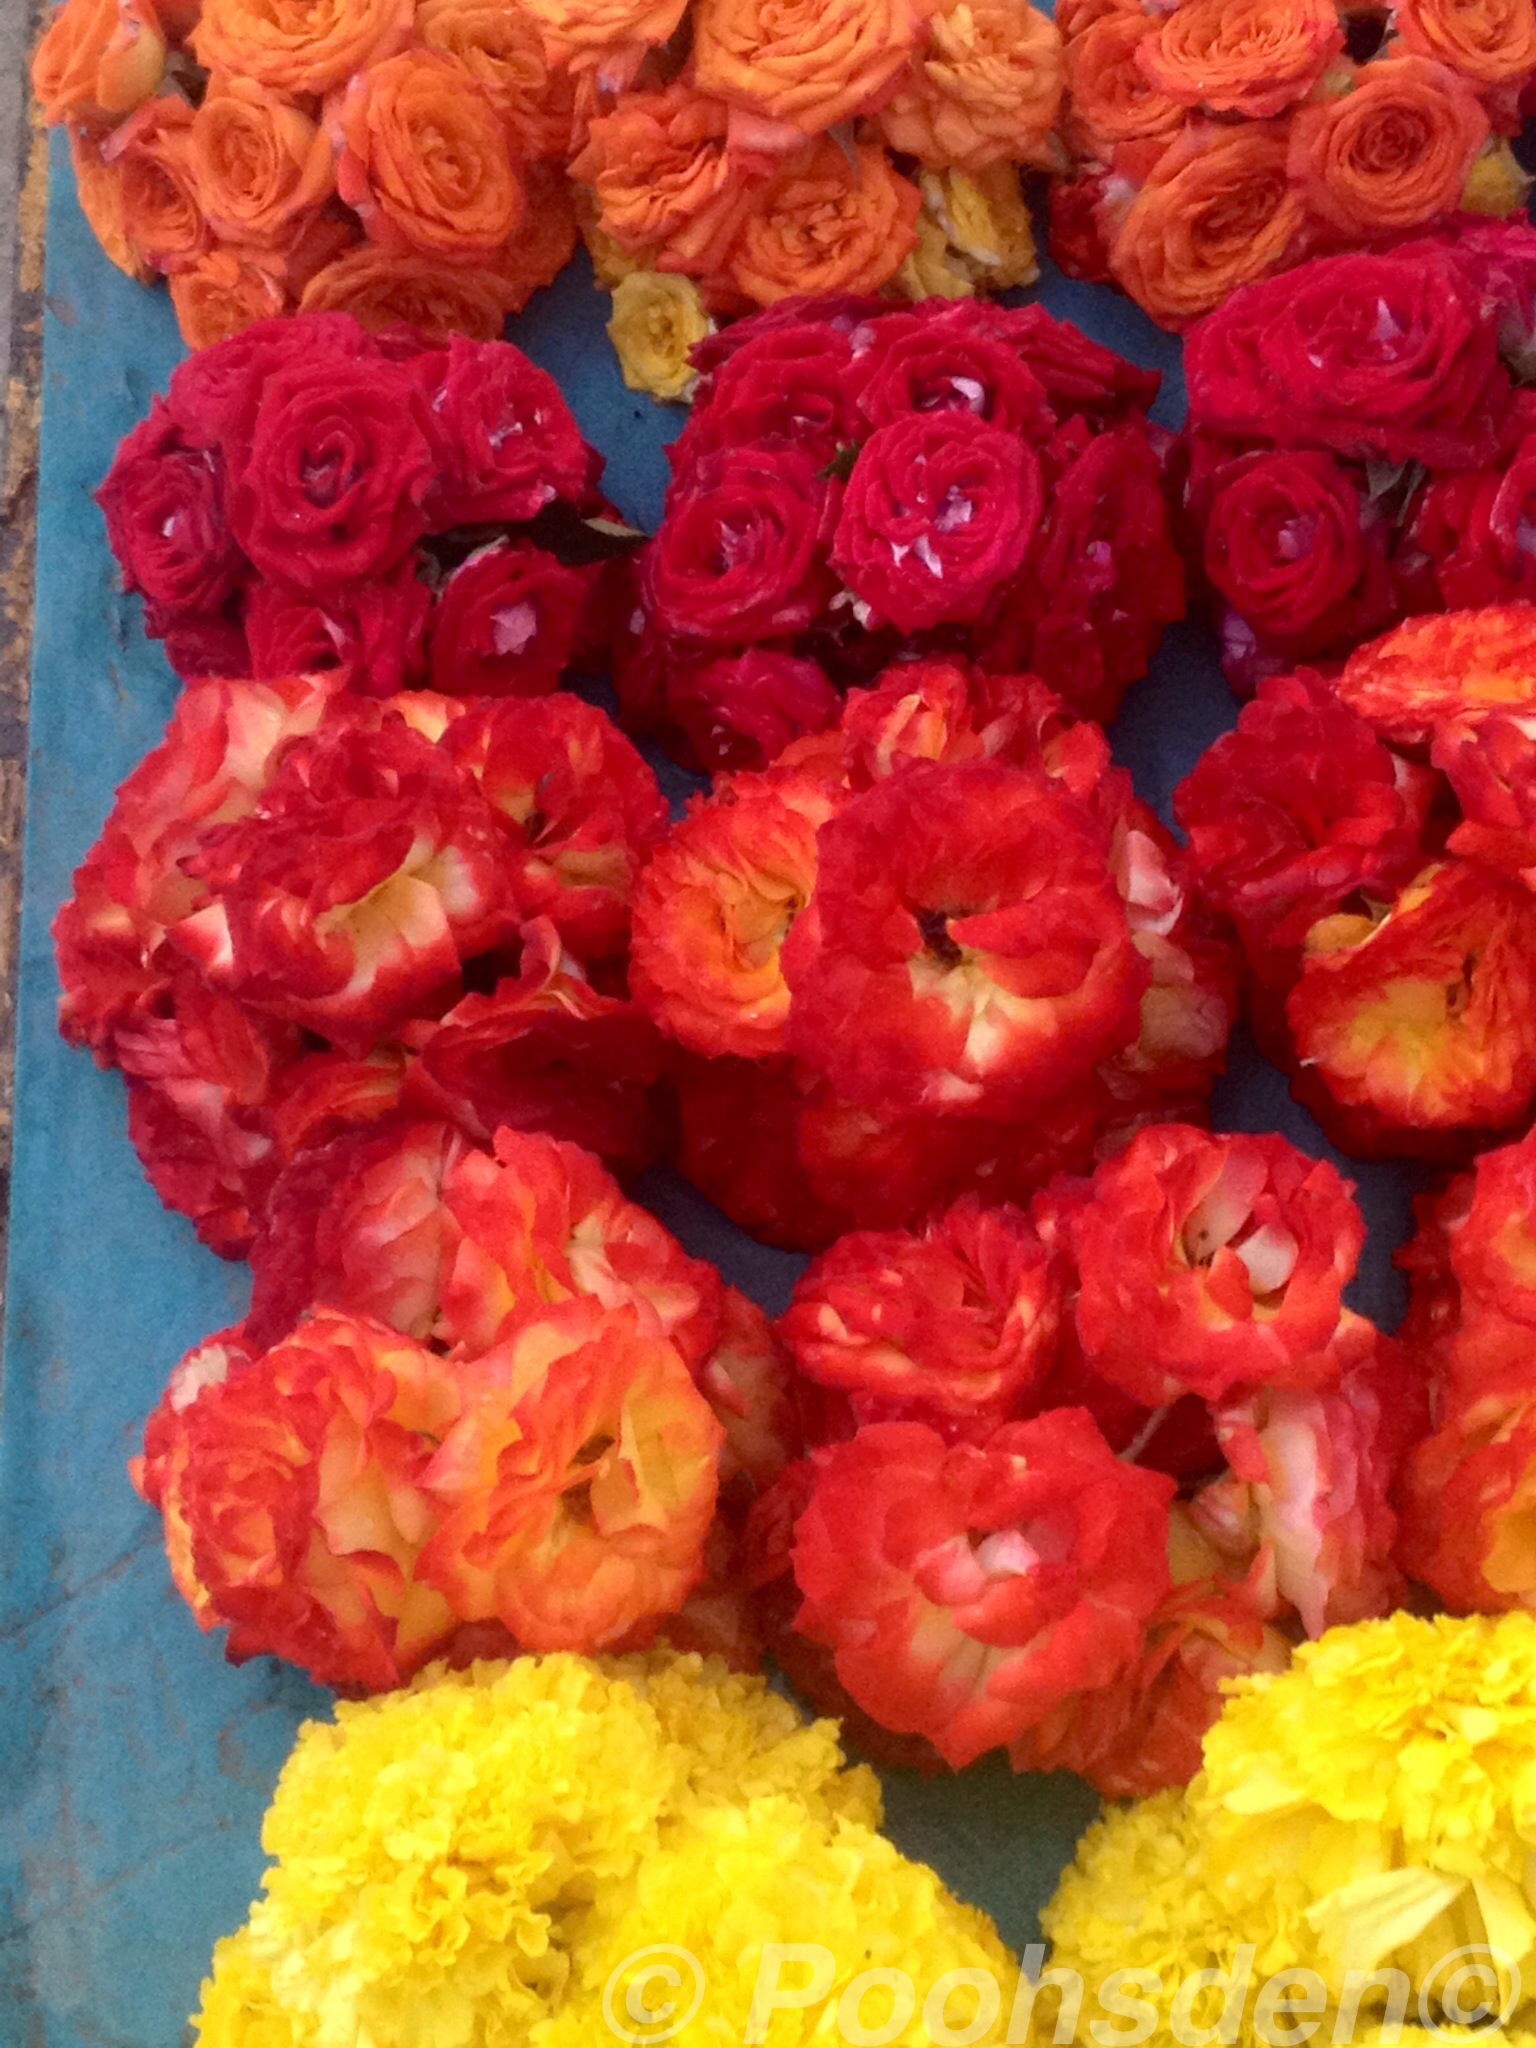 Roses for sale at the roadside, Chennai, India